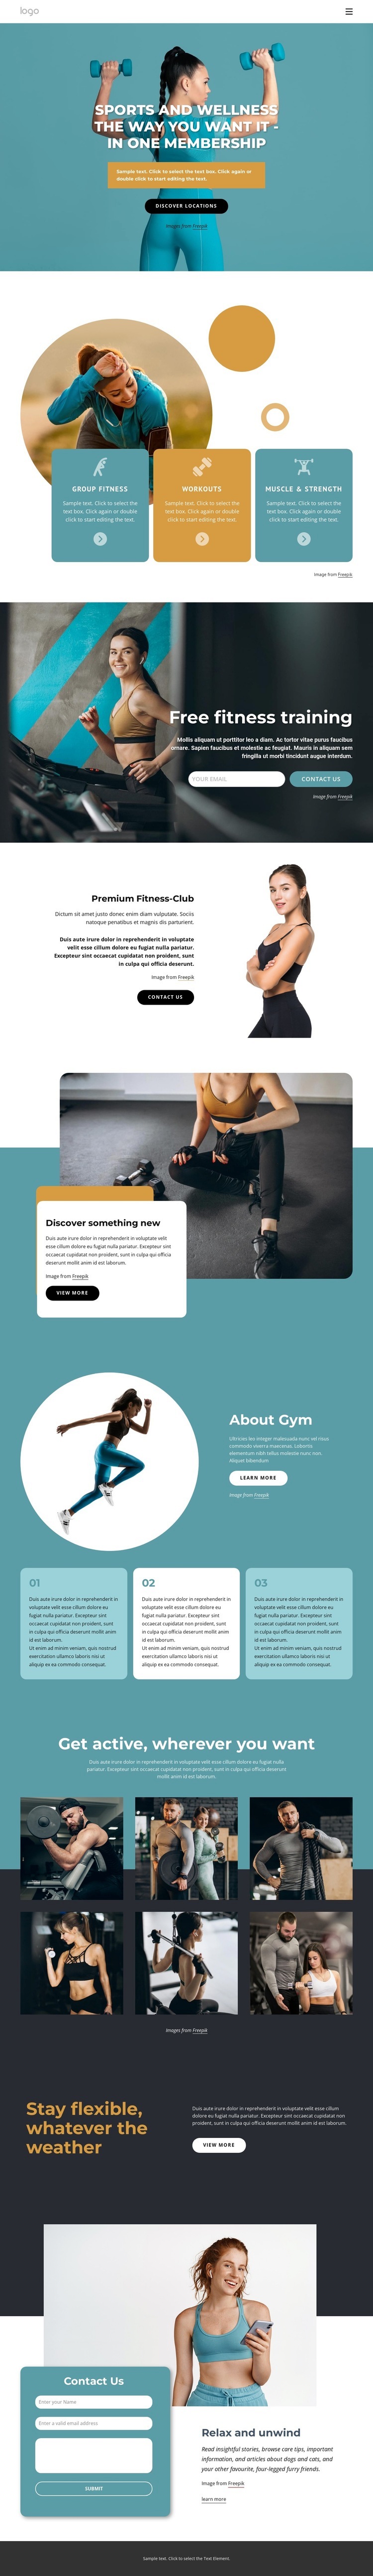 Workout anywhere with one membership Wysiwyg Editor Html 